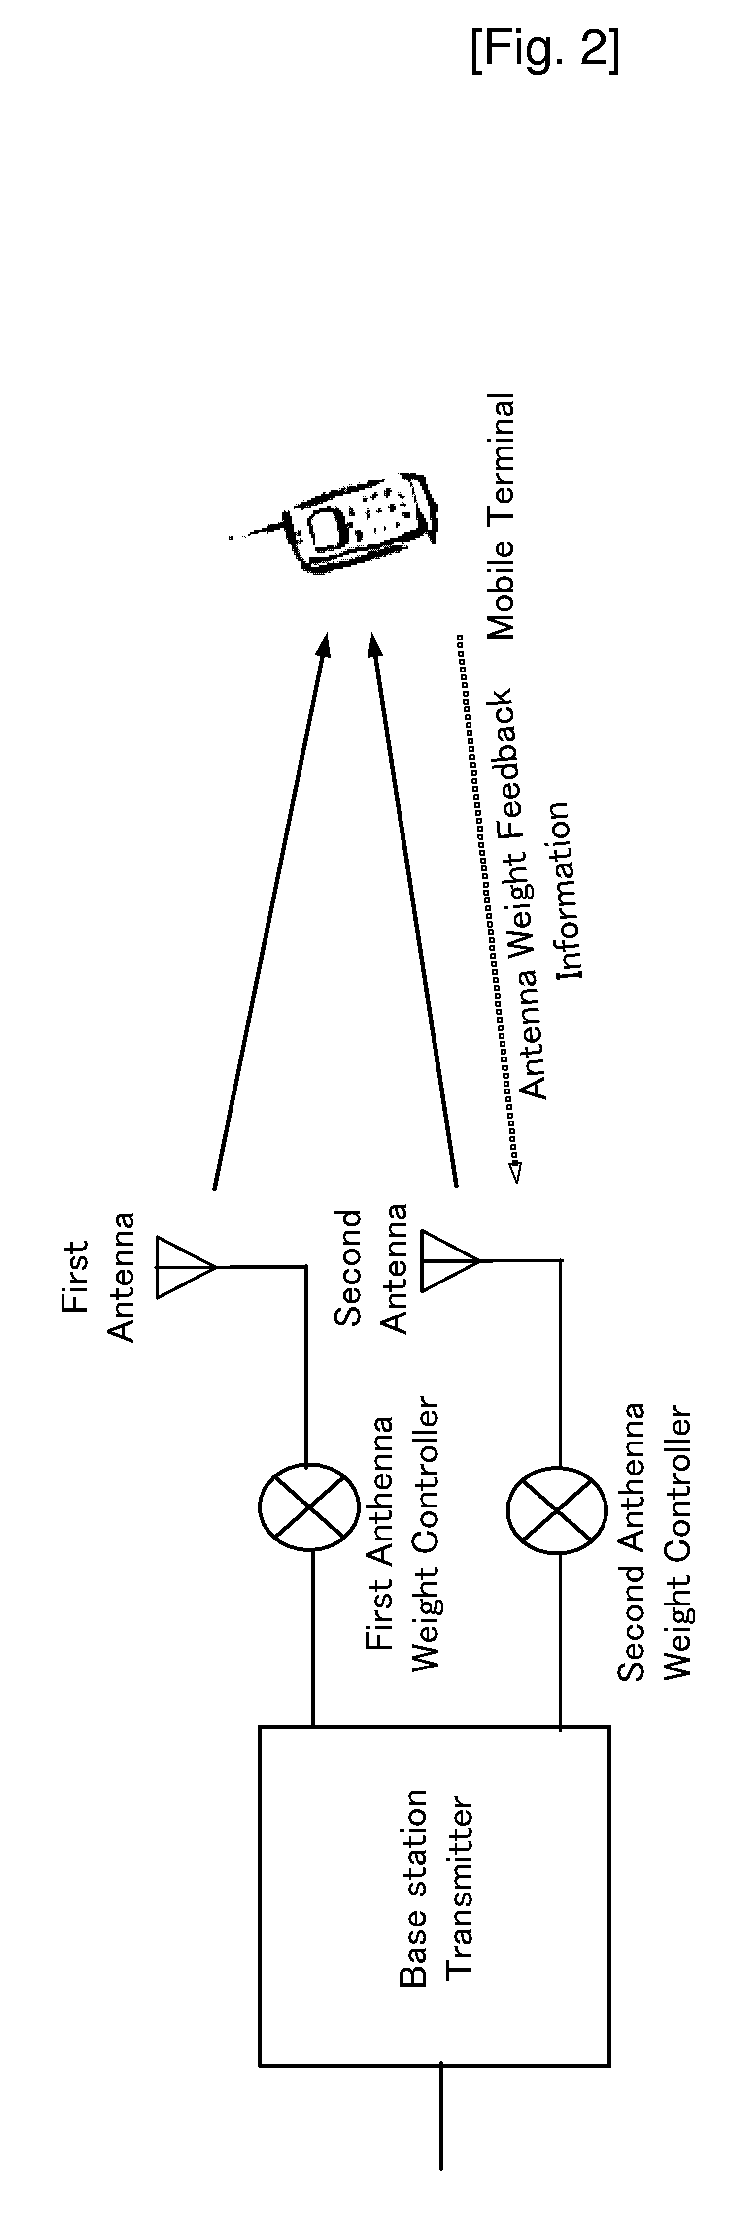 Diversity Transmission Method and Transmitter of a Base Station Using the Same in a Mobile Commmunication System